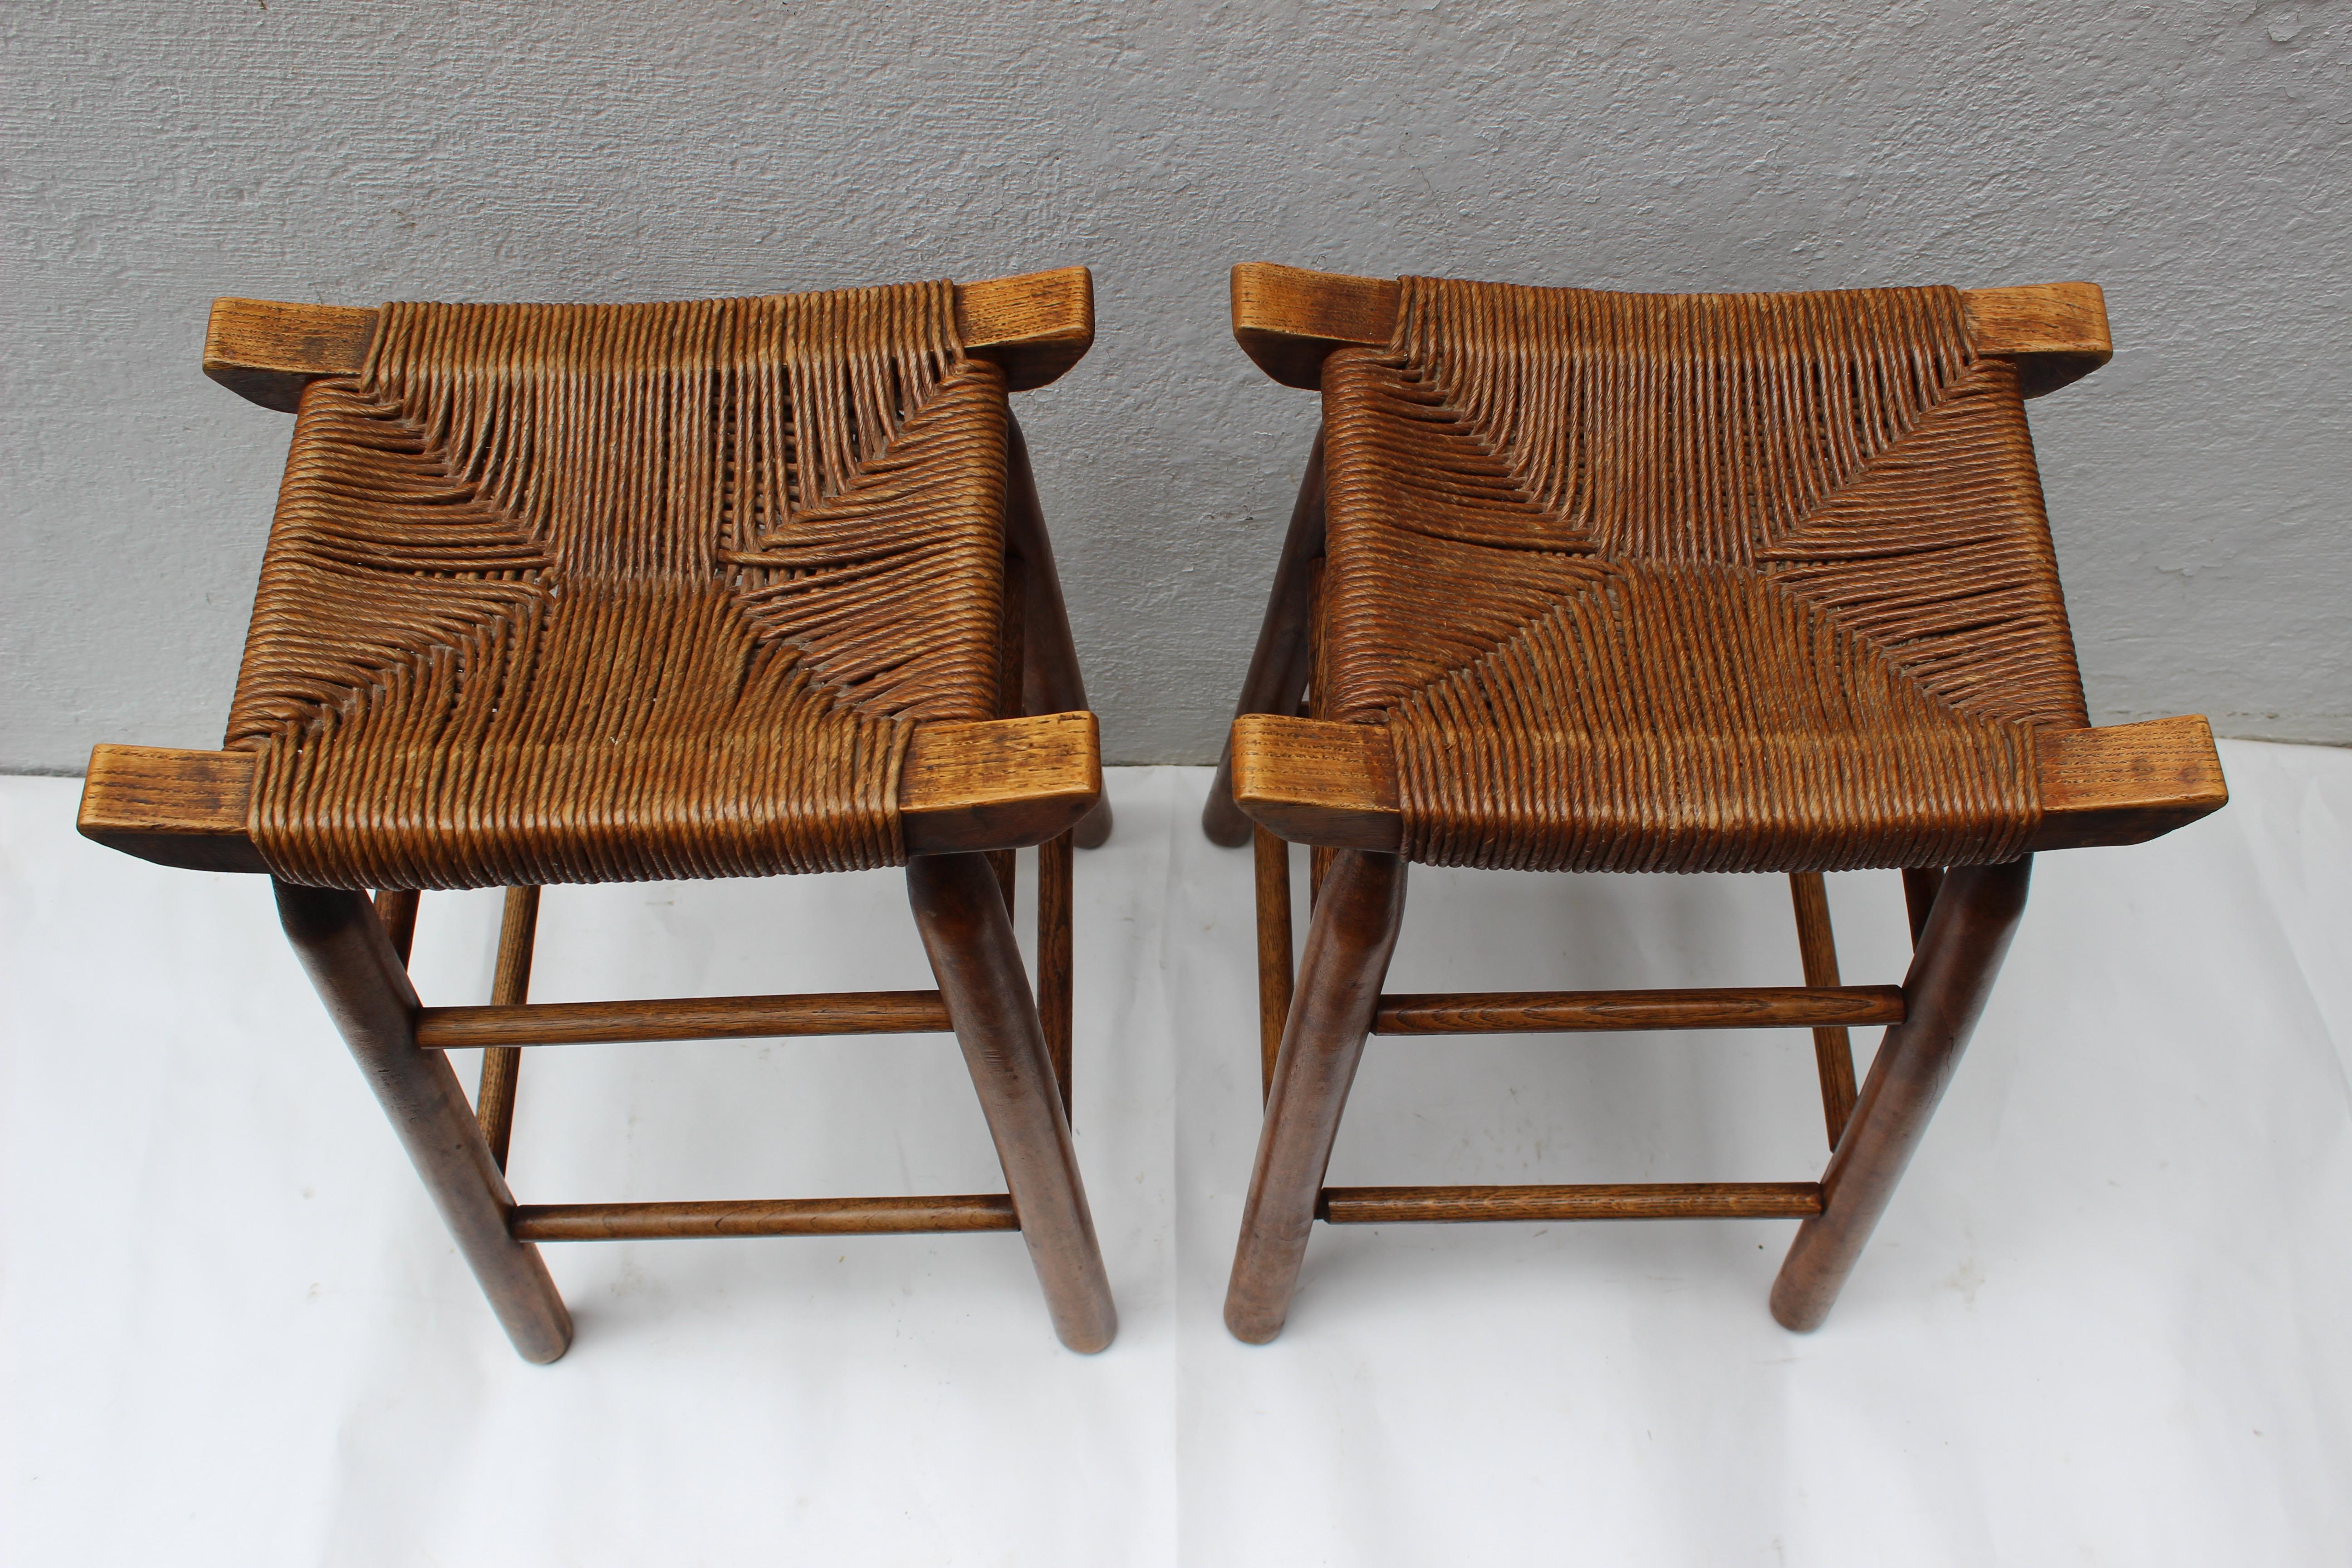 20th Century Set of Four Wood Stools with Rush Seats